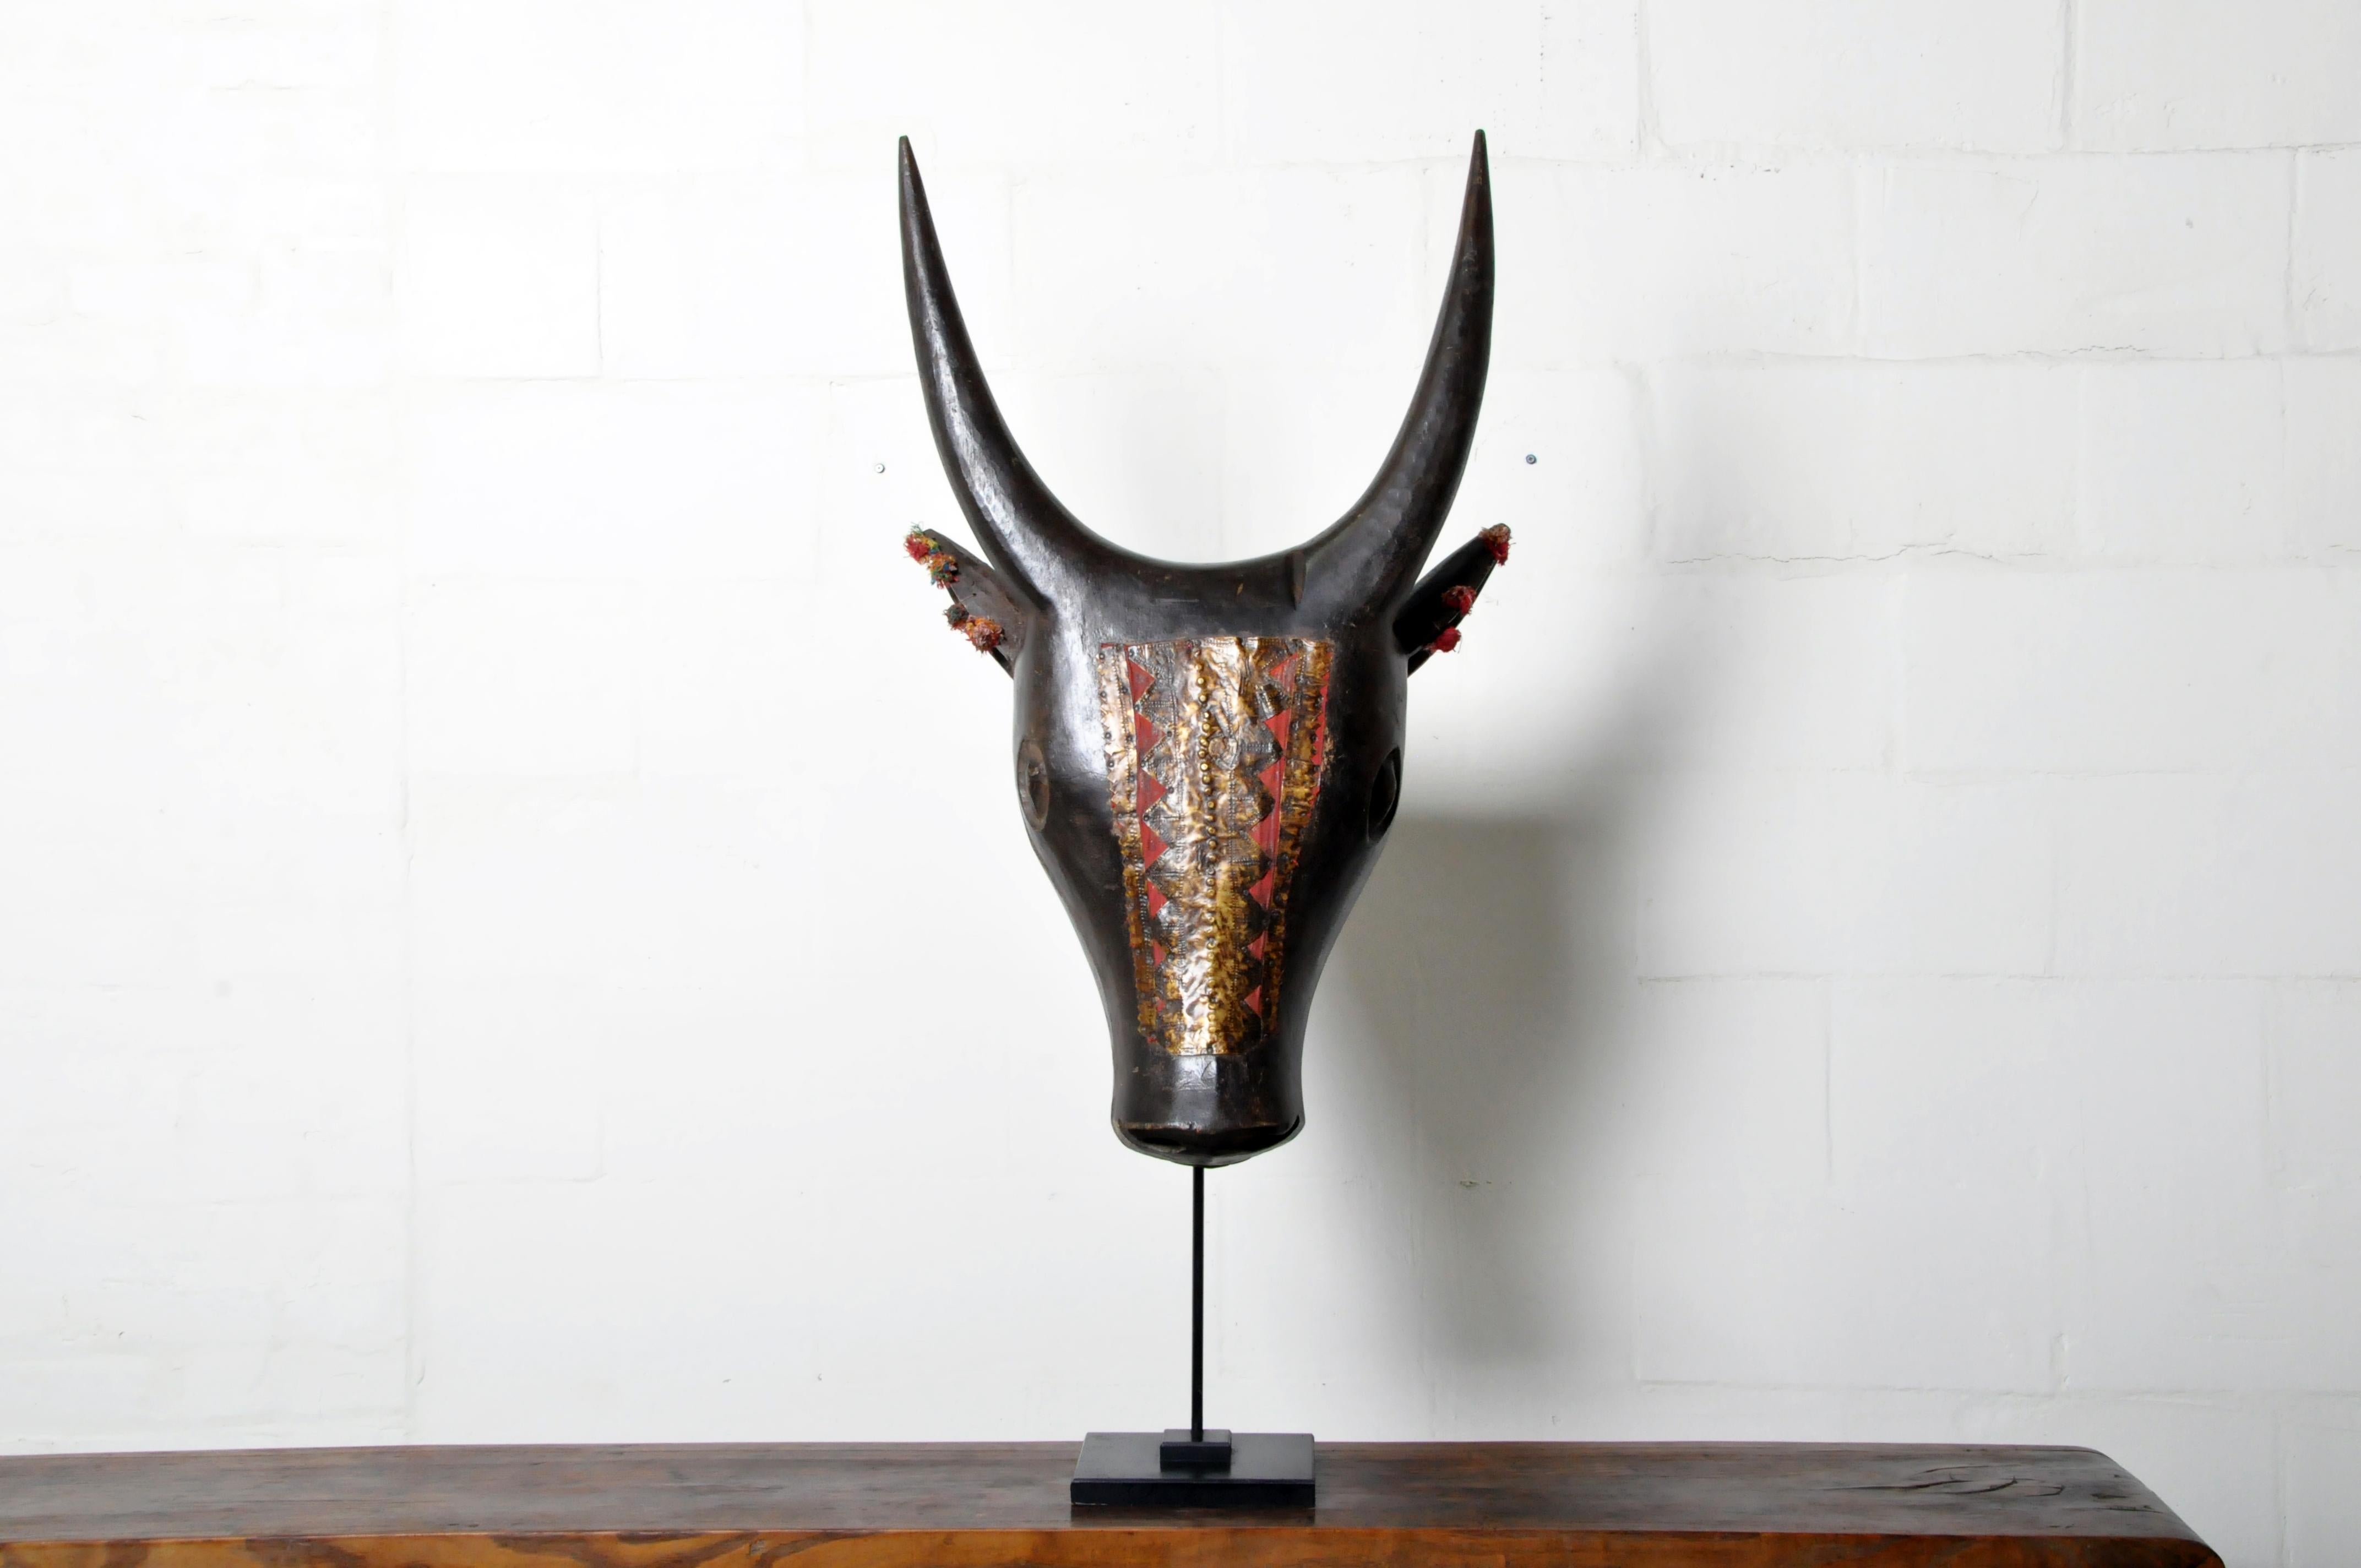 An Indian vintage Nandi bull sculpture from the mid 20th century, with carved motifs, dark patina, and metal adornment. Carved in India during the mid 20th century, this carved wooden sculpture features Nandi, son of the sage Shilada. Depicted as a